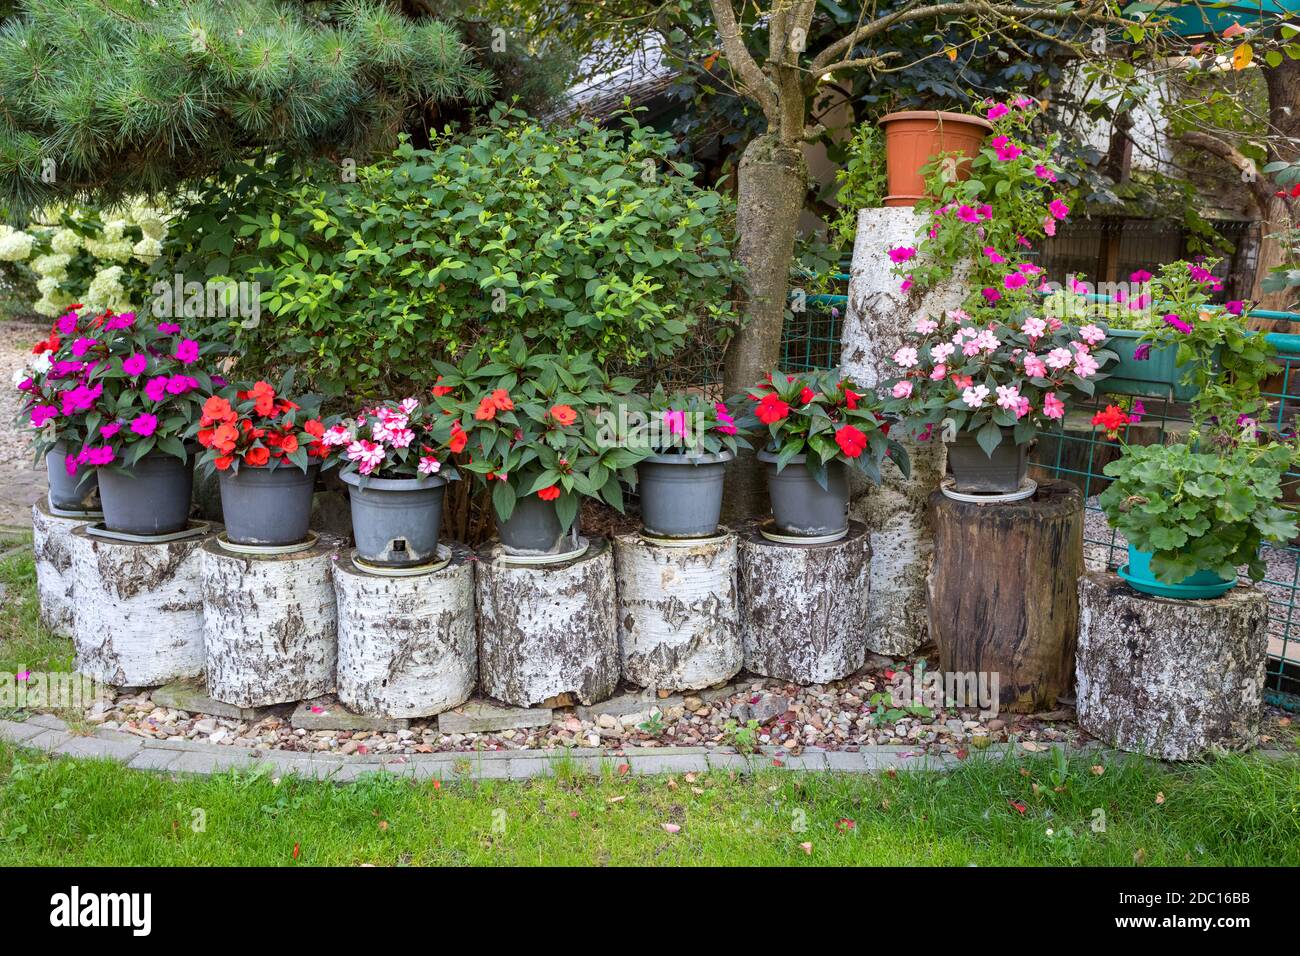 Red and pink New Guinea impatiens flower in pots on birch chunk in summer garden Stock Photo